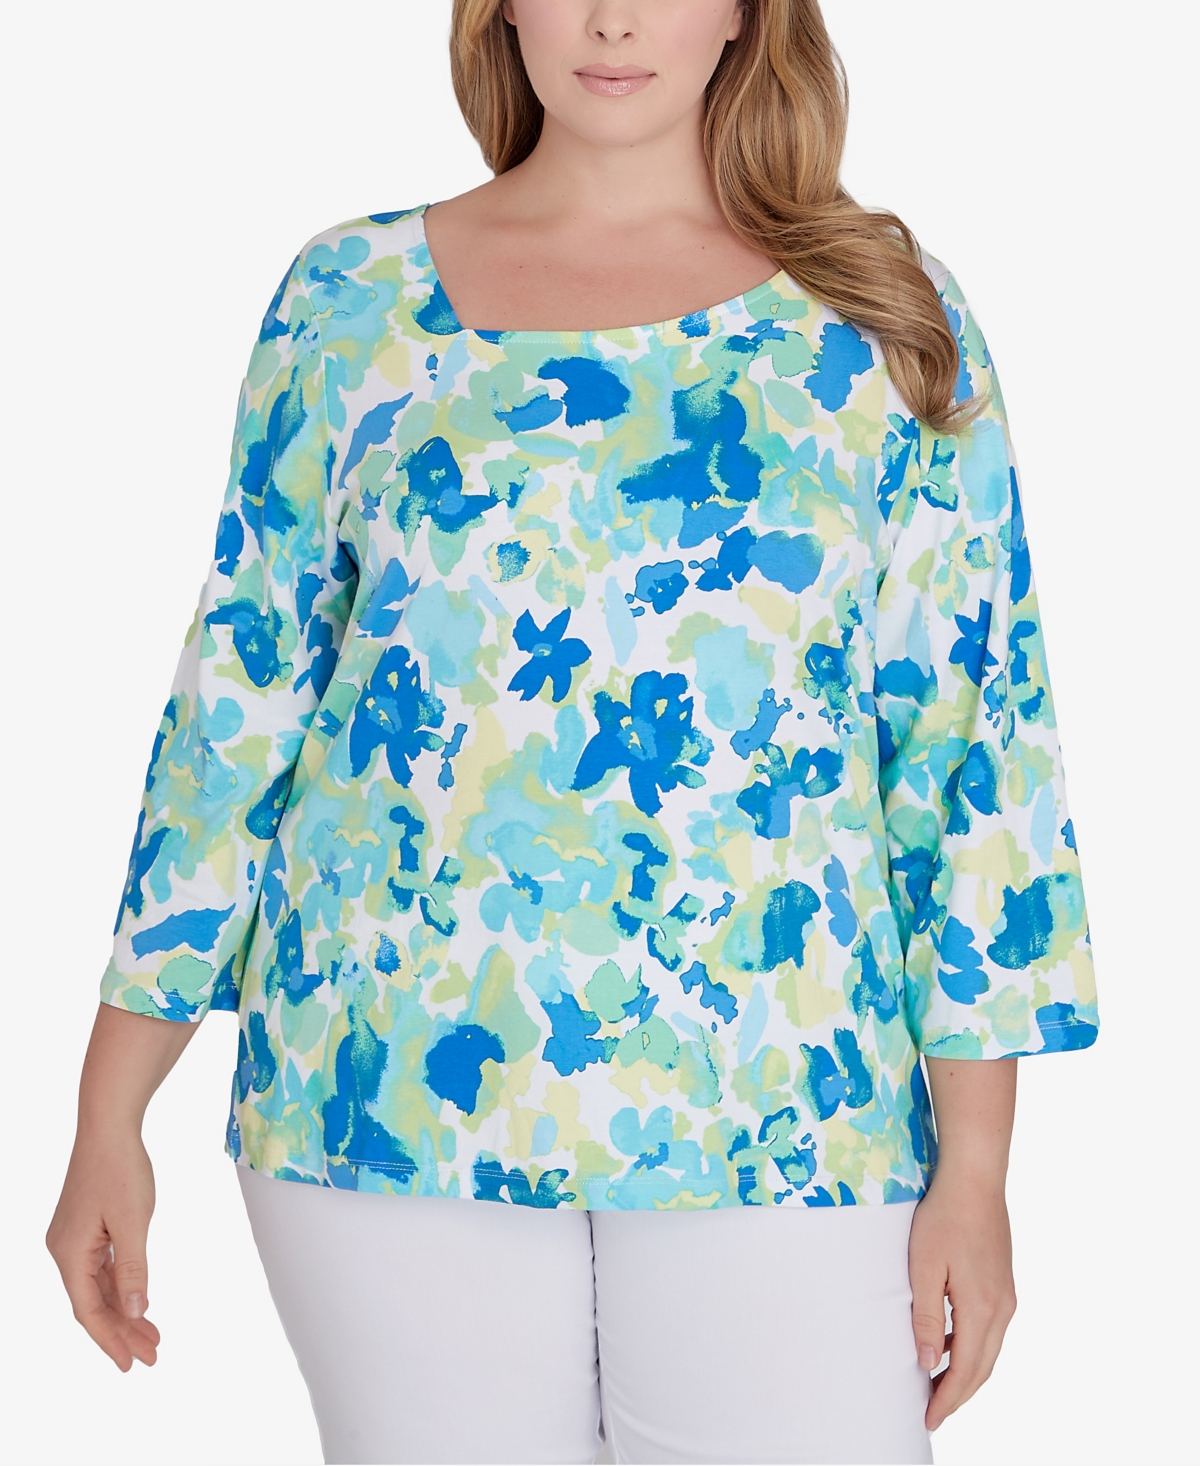 Plus Size Feeling The Lime 3/4 Sleeve Top - Bright Blue Multi